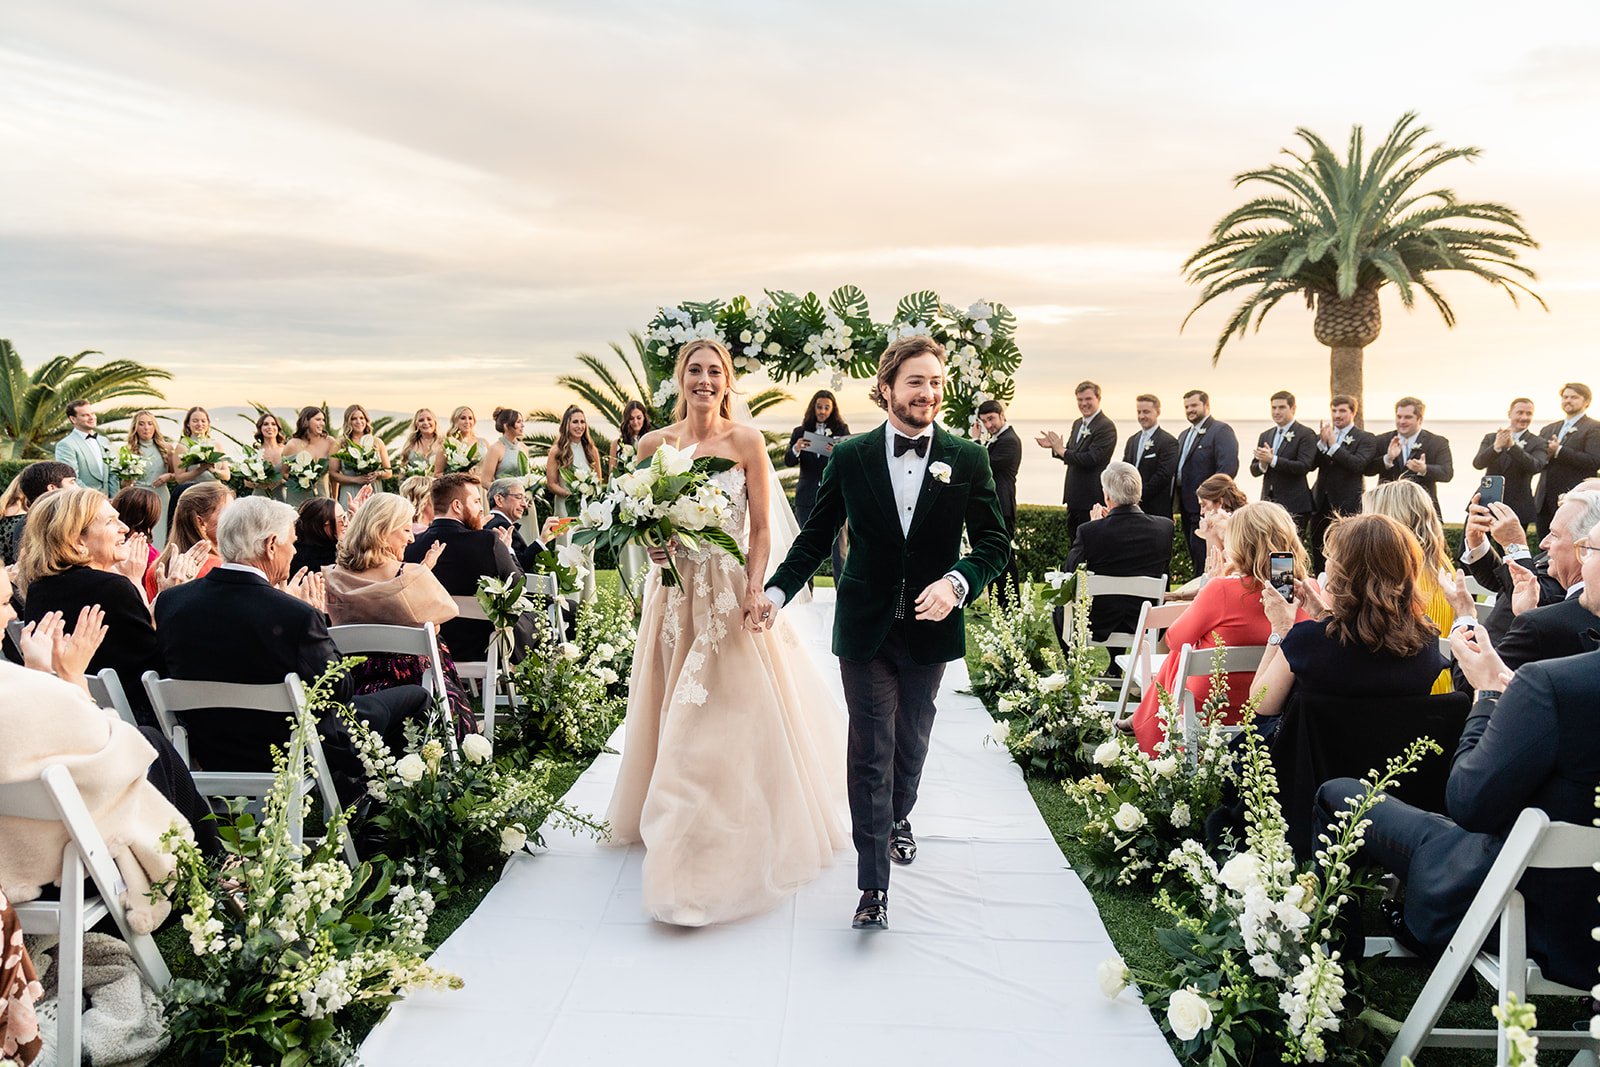 just married at bel air bay club in pacific palisades